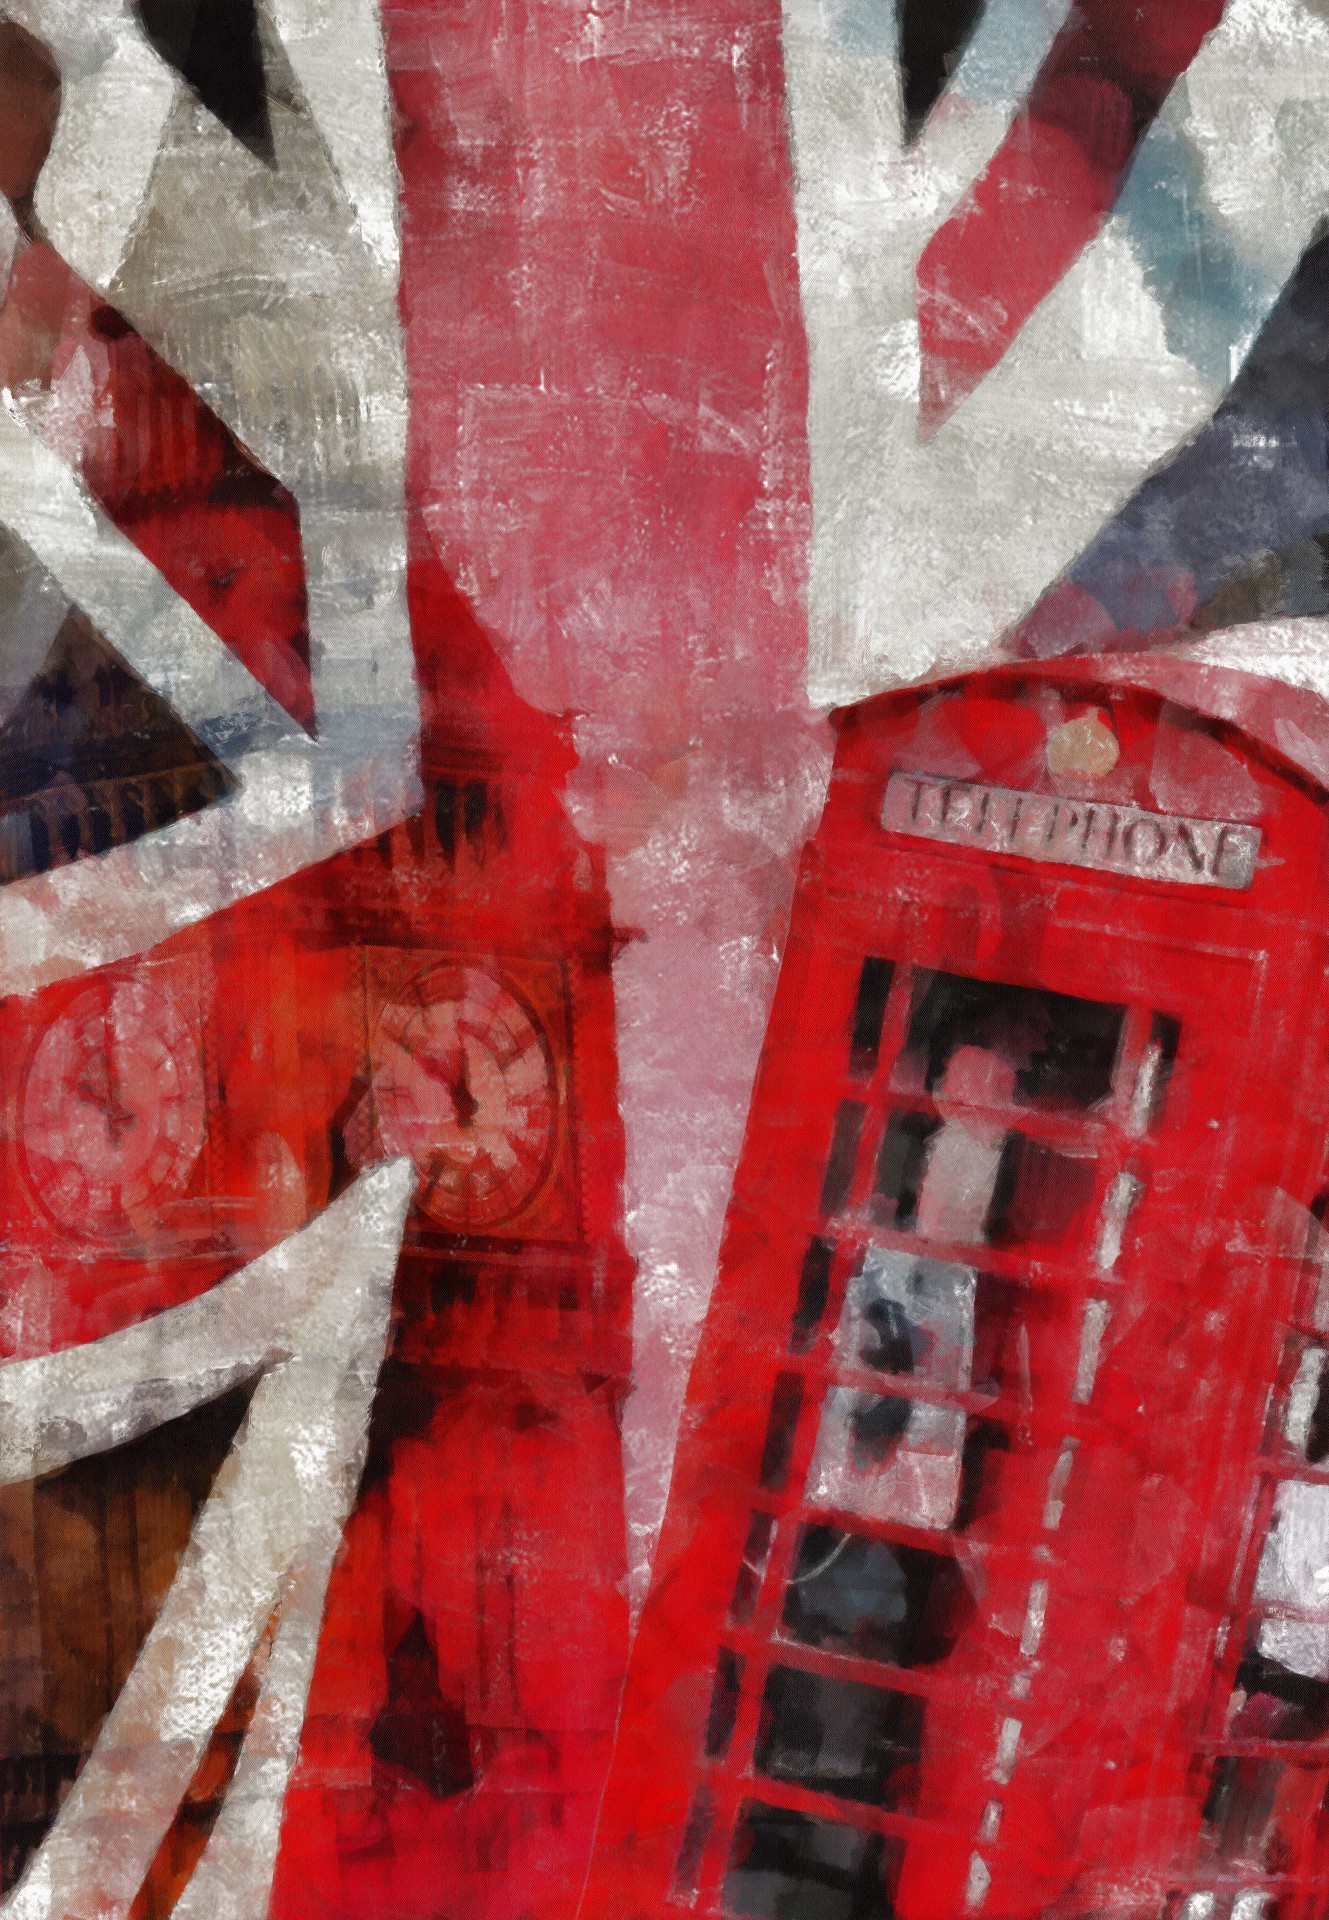 Digitally created grunge style collage painting of the Union Jack flag, a British telephone box and Big Ben.